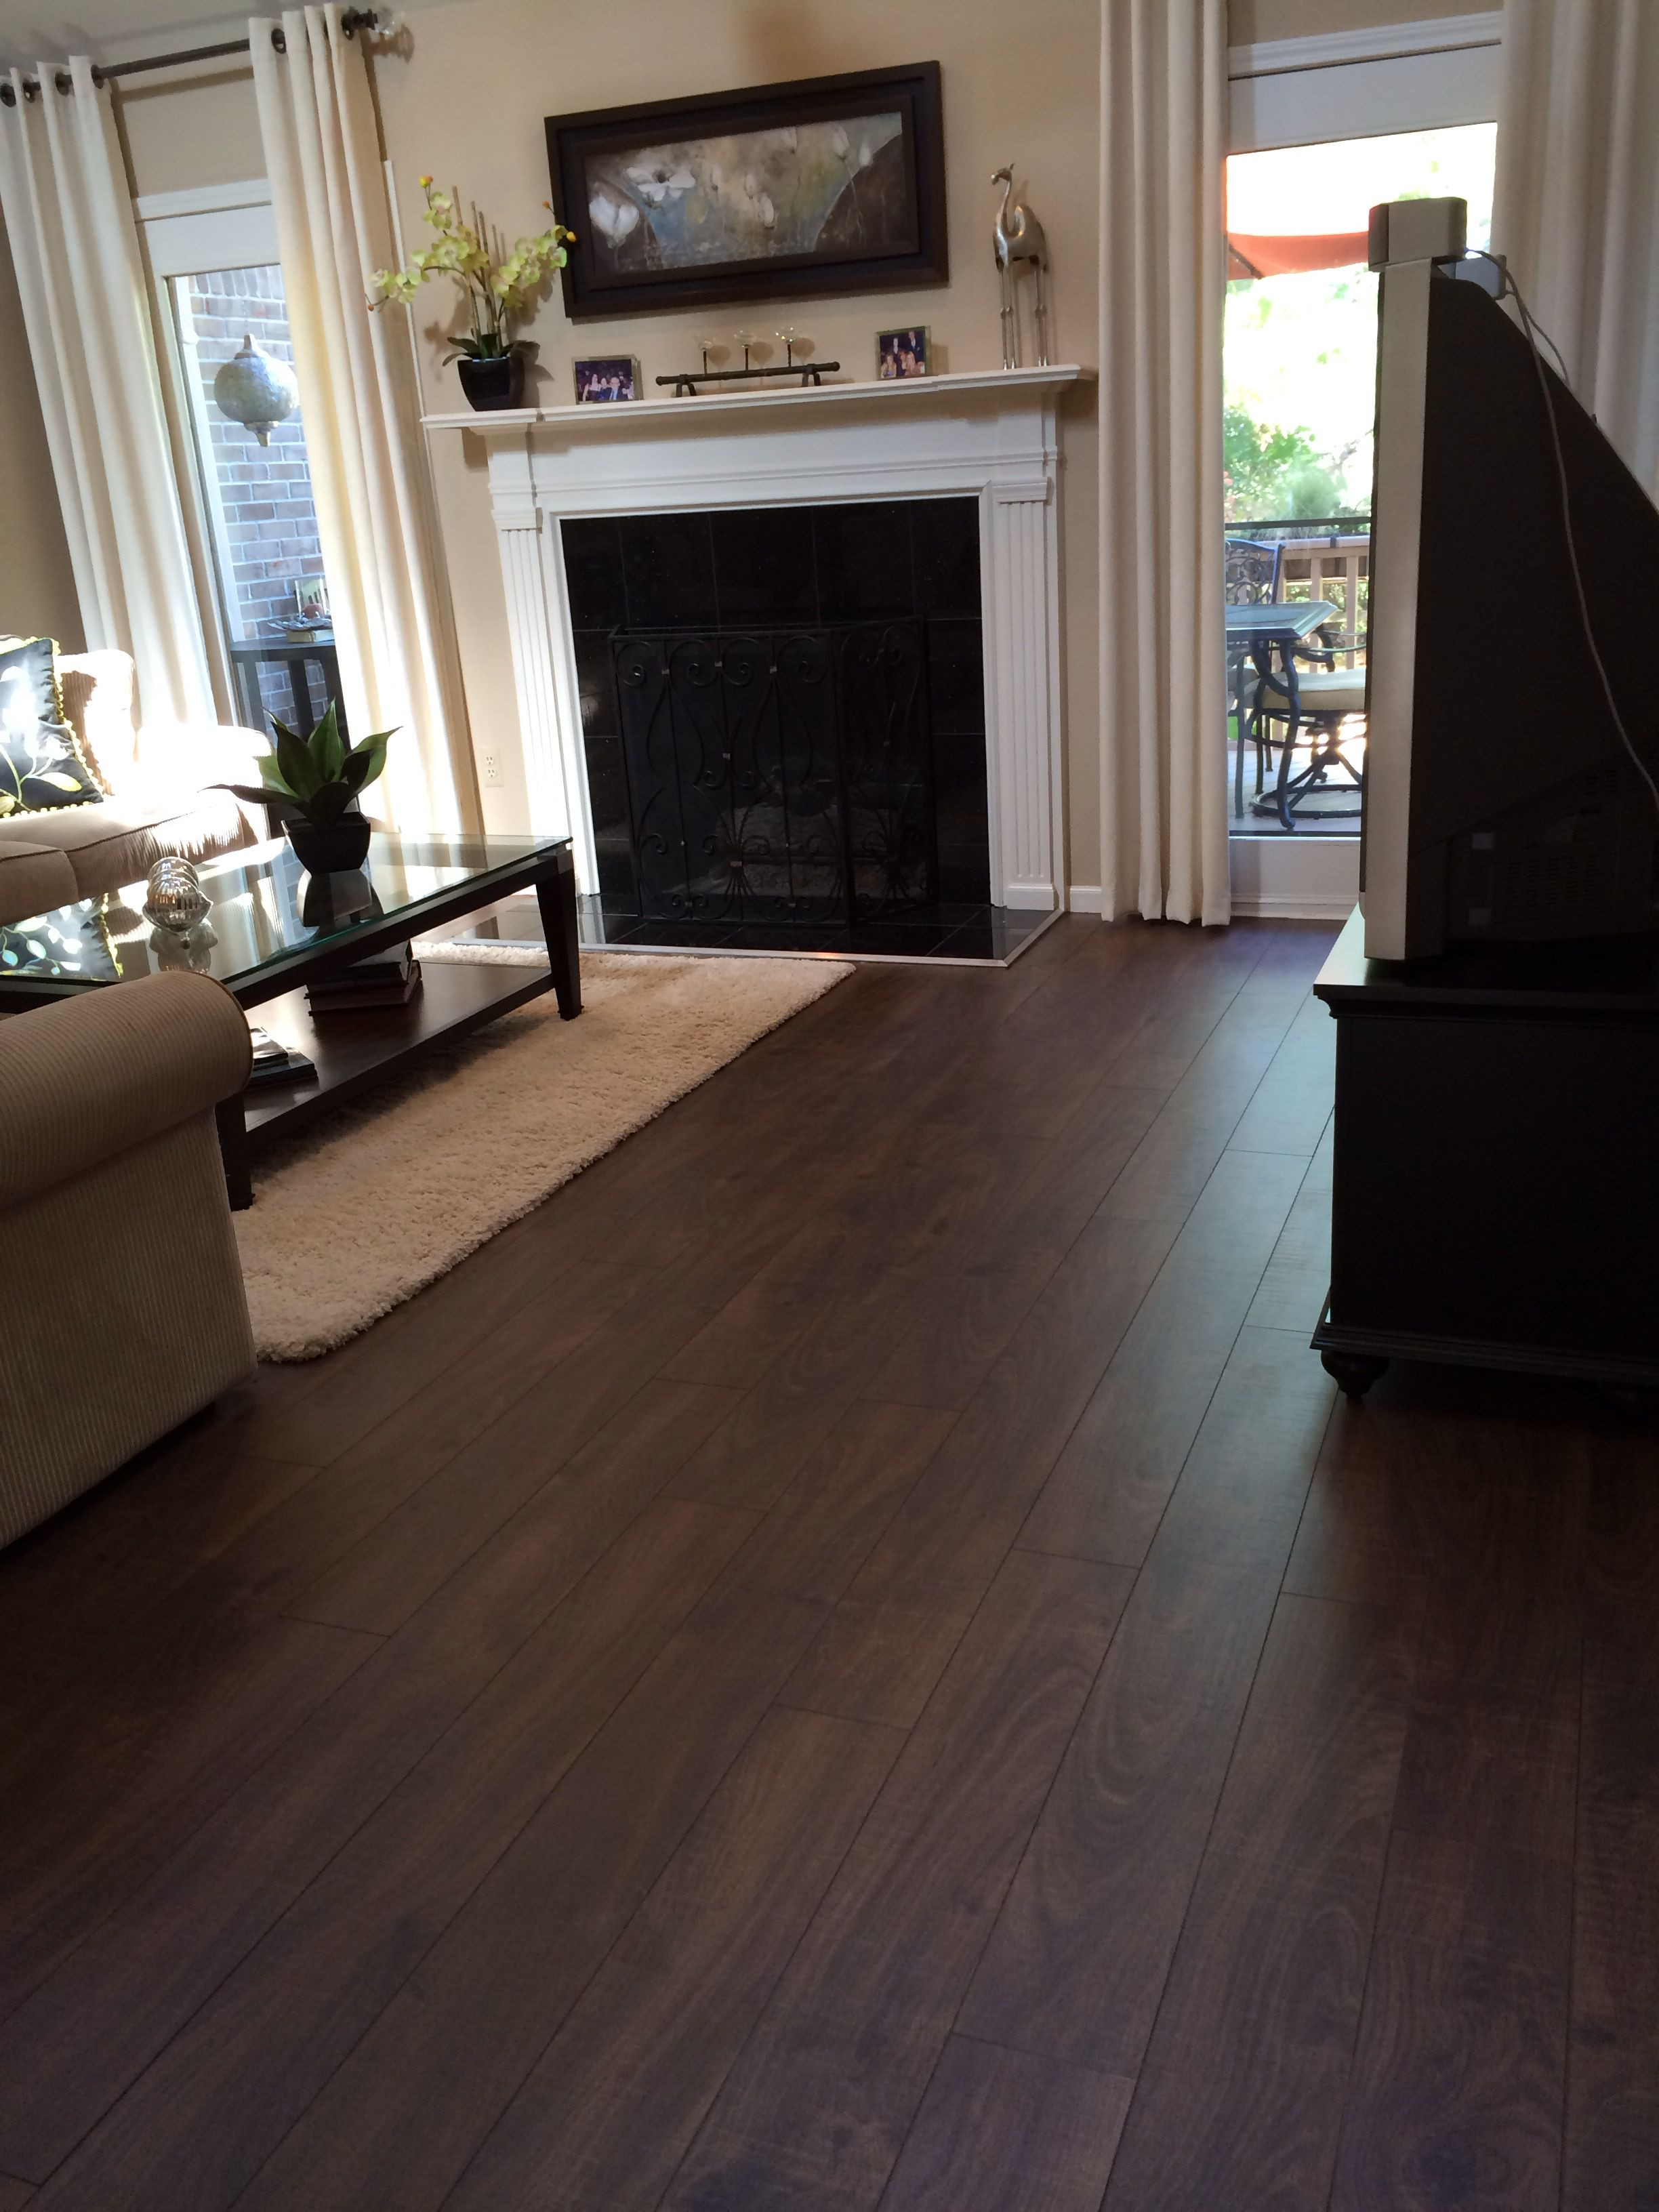 installing bamboo hardwood floors of pin by liliana legarreta on floors and stairs pinterest home throughout dark laminate kitchen flooring best of dark laminate kitchen flooring we are inspired by laminate floor ideas for more inspiration visit